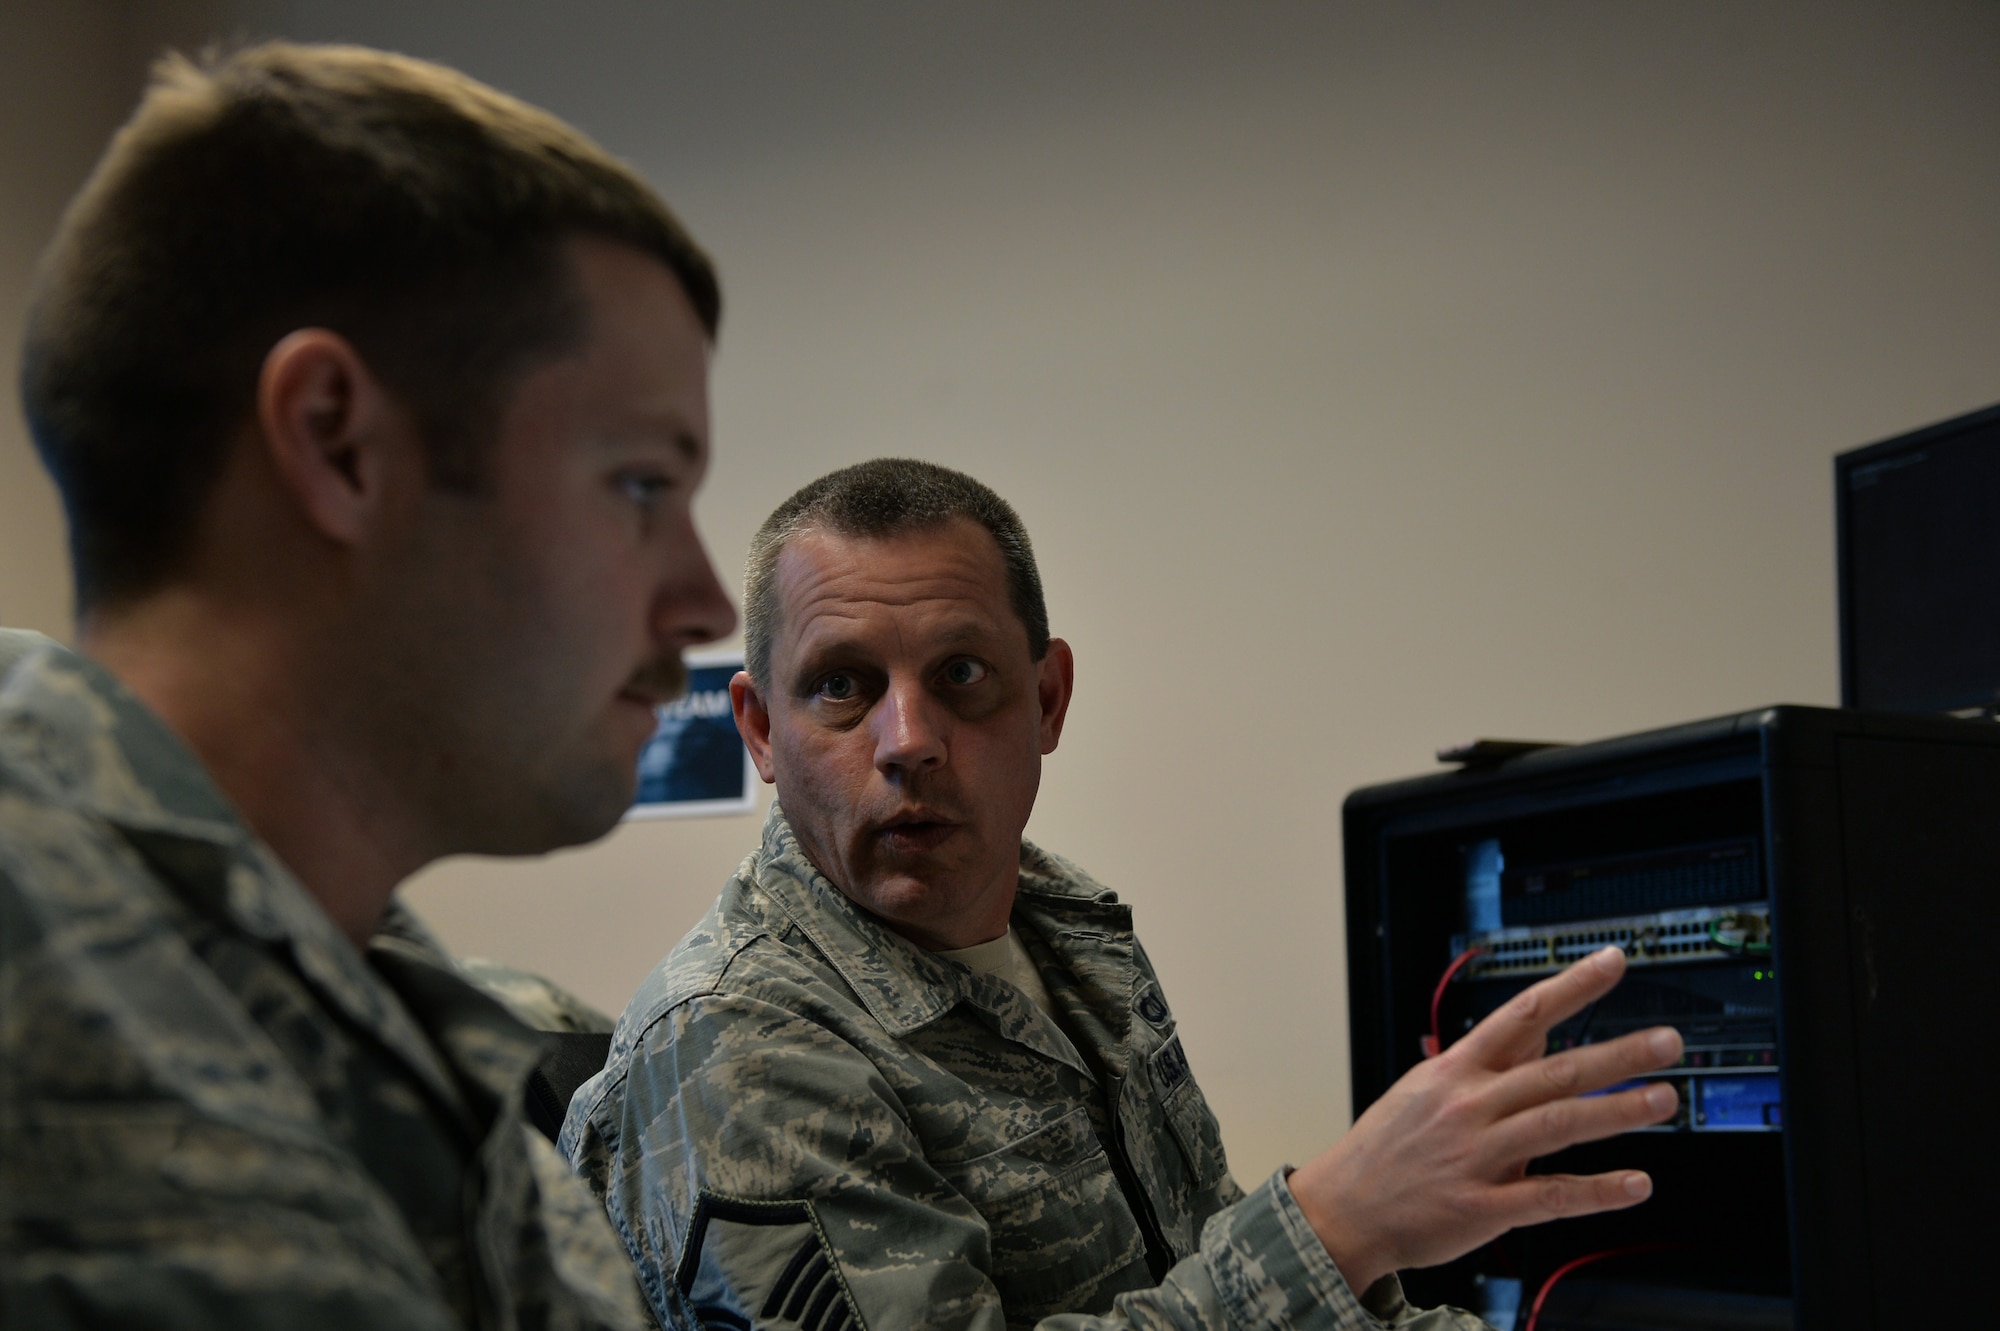 Members of the Mission Defense Team at the 432nd Aircraft Communications Maintenance Squadron discuss a simulated cyber-attack during a cyber-defense training exercise at Creech Air Force Base, Nevada, Dec. 21, 2017. The Air Combat Command selected the 432nd ACMS to test the possibilities of the Cyber Squadron Initiative (CS-I) by defending the Remotely Piloted Aircraft network. (U.S. Air Force photo by Airman 1st Class Haley Stevens)